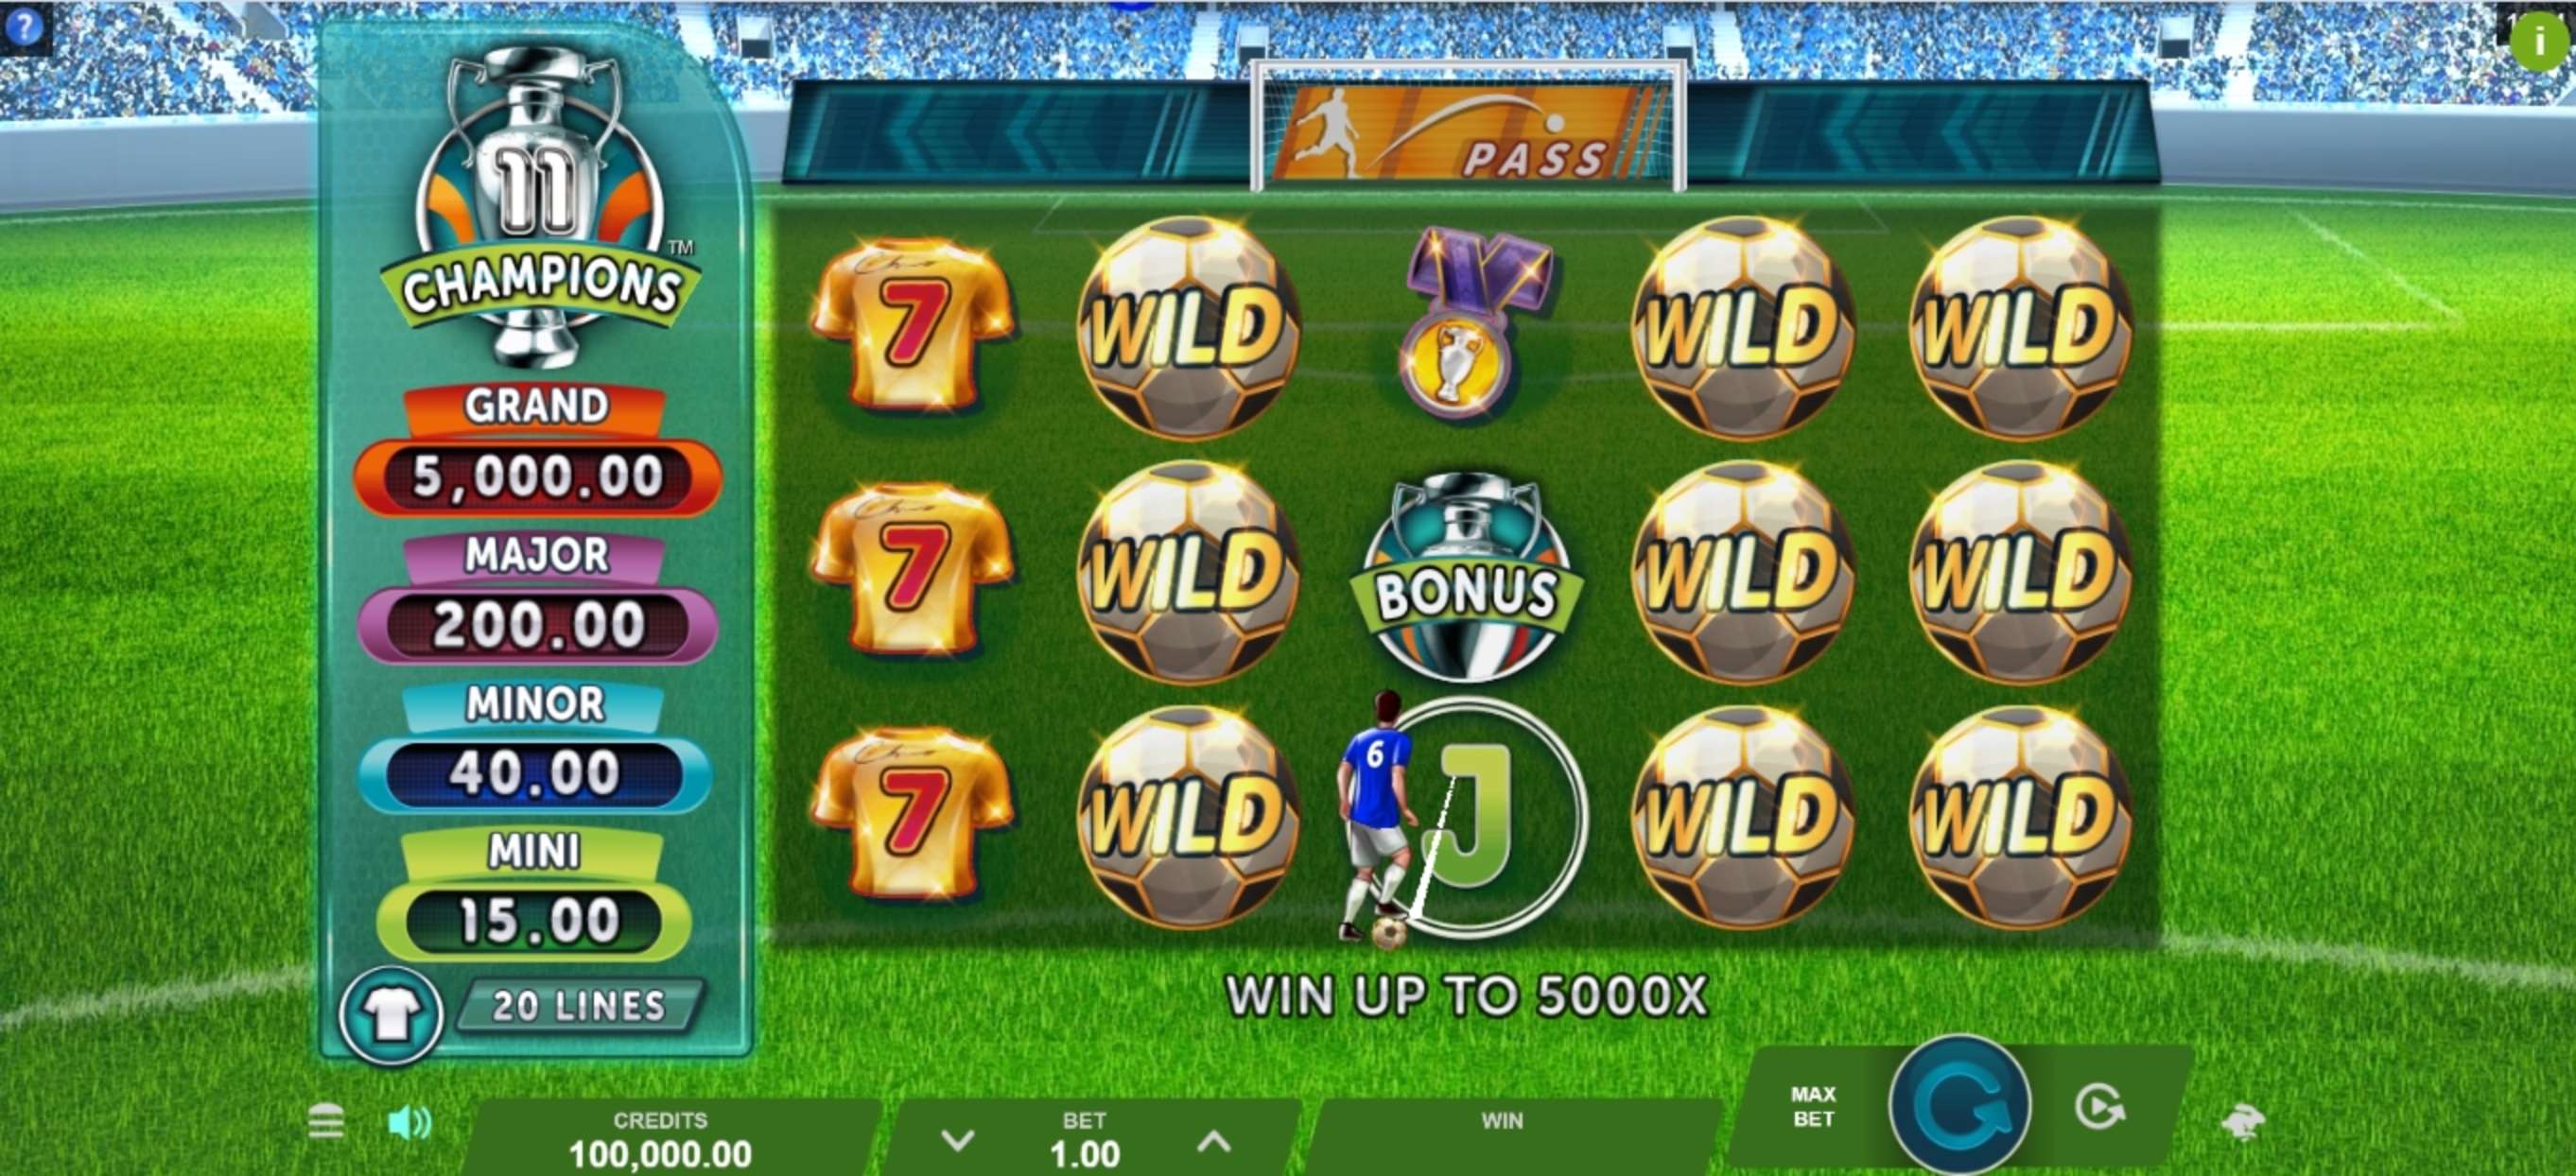 Reels in 11 Champions Slot Game by Gameburger Studios